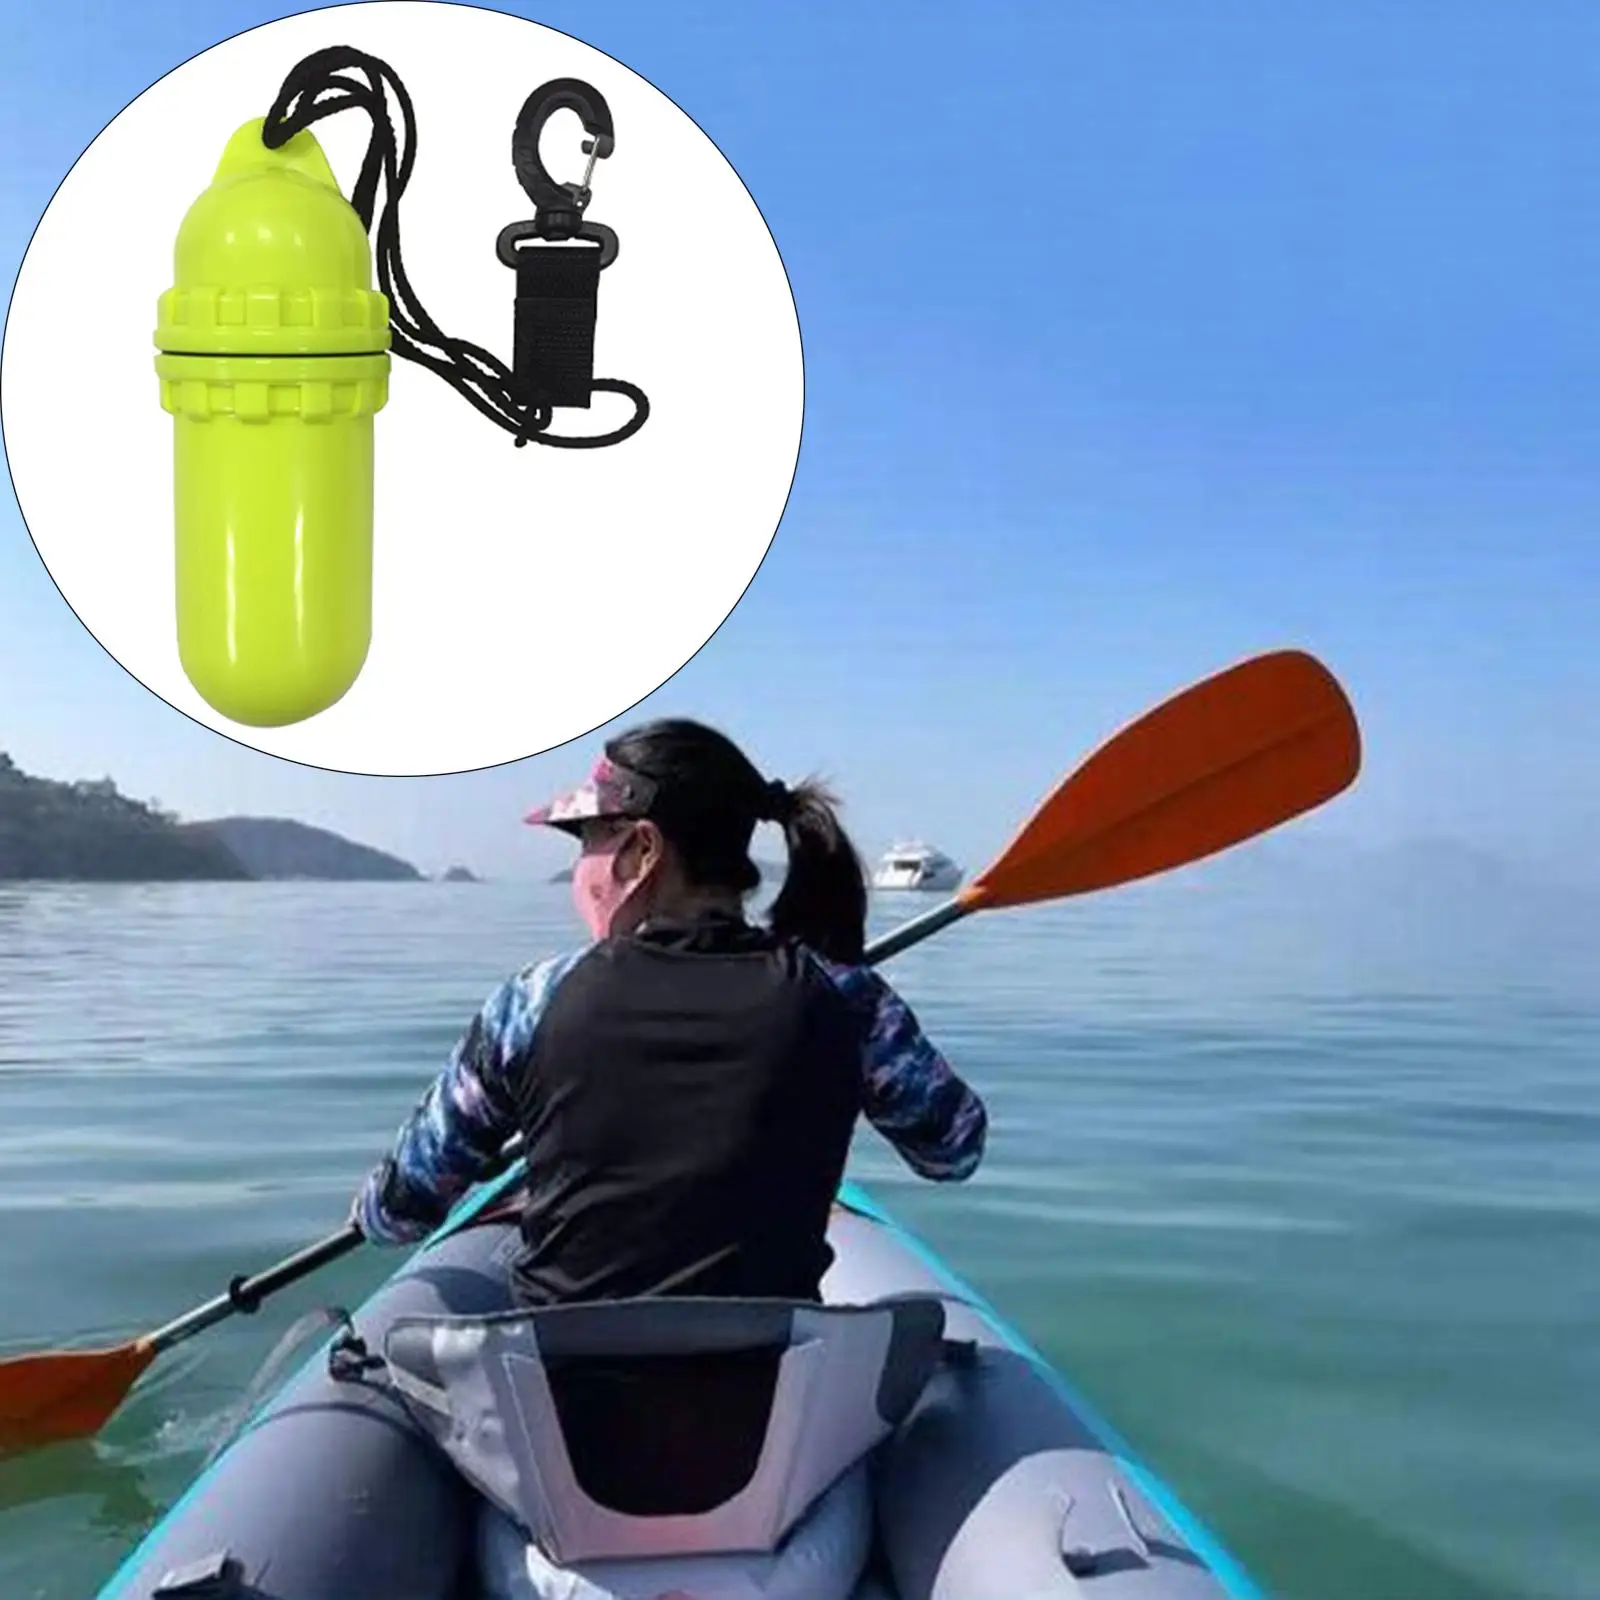 Waterproof Dry Bag Portable with Rope and Clip for Kayaking, Beach, Rafting, Boating, Hiking, Camping and Fishing